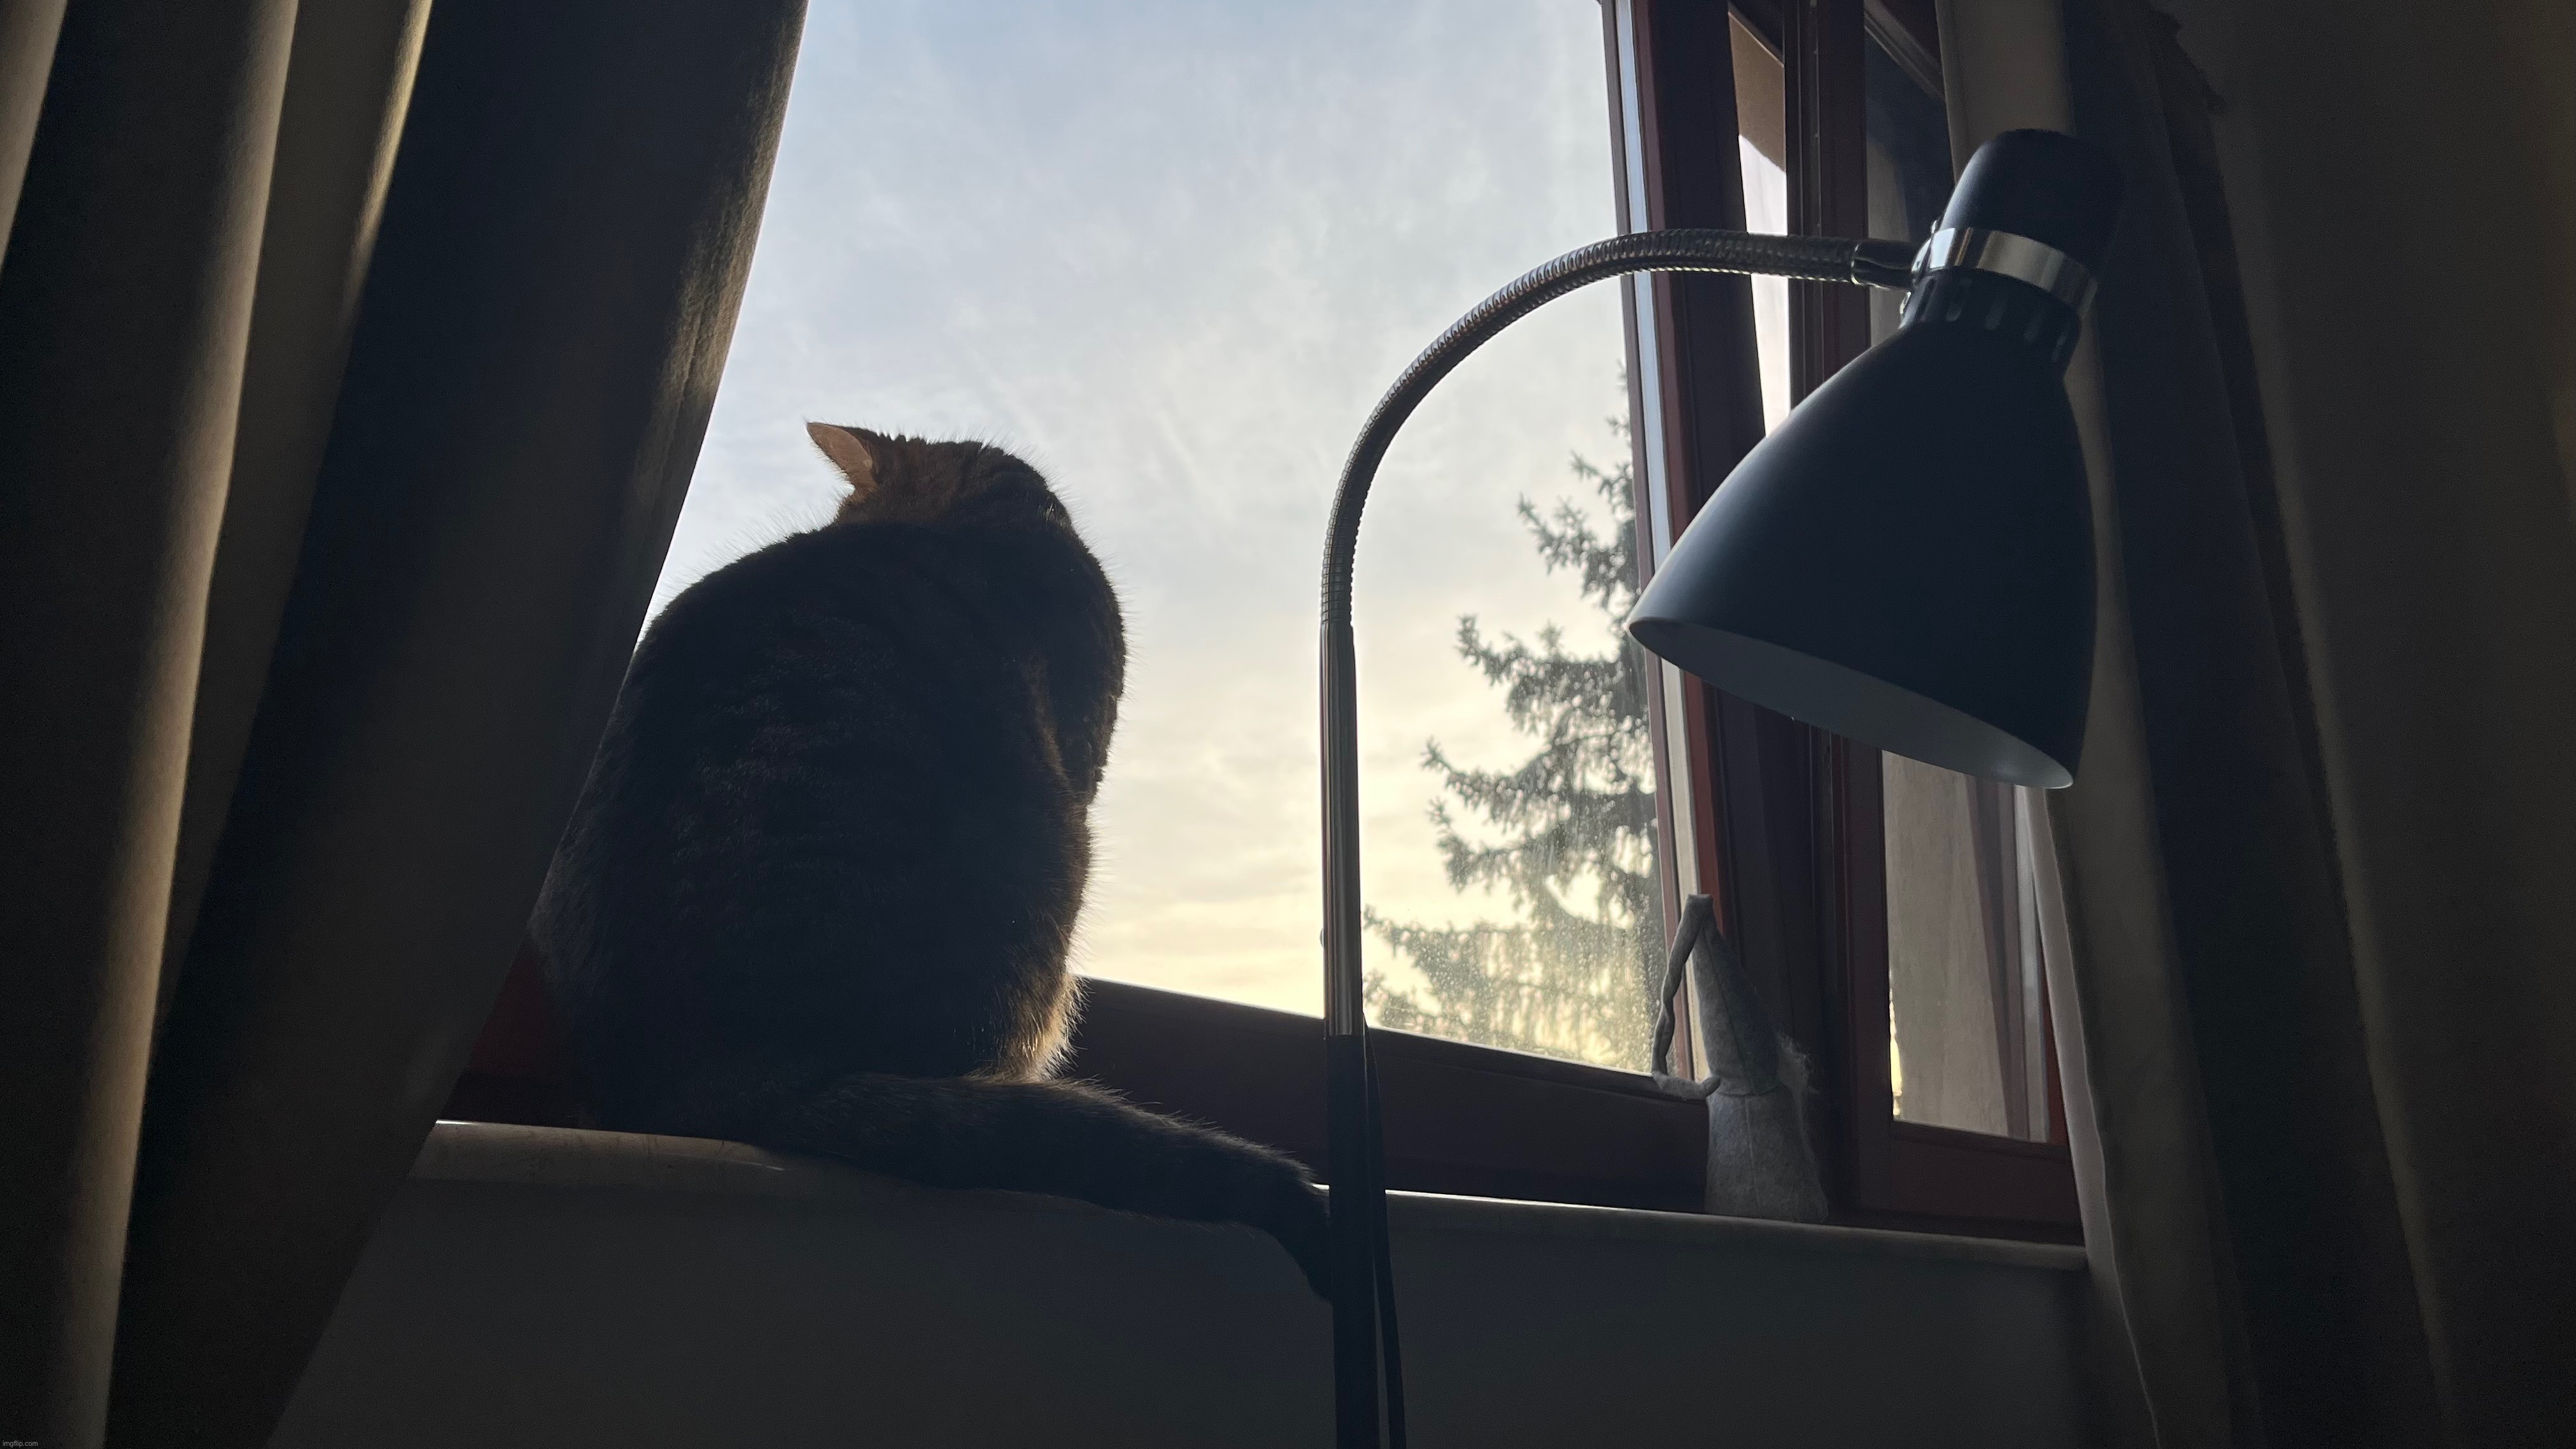 haven't posted here in a long while, have a pic of my cat staring out my window | image tagged in share your own photos,photography,cats | made w/ Imgflip meme maker